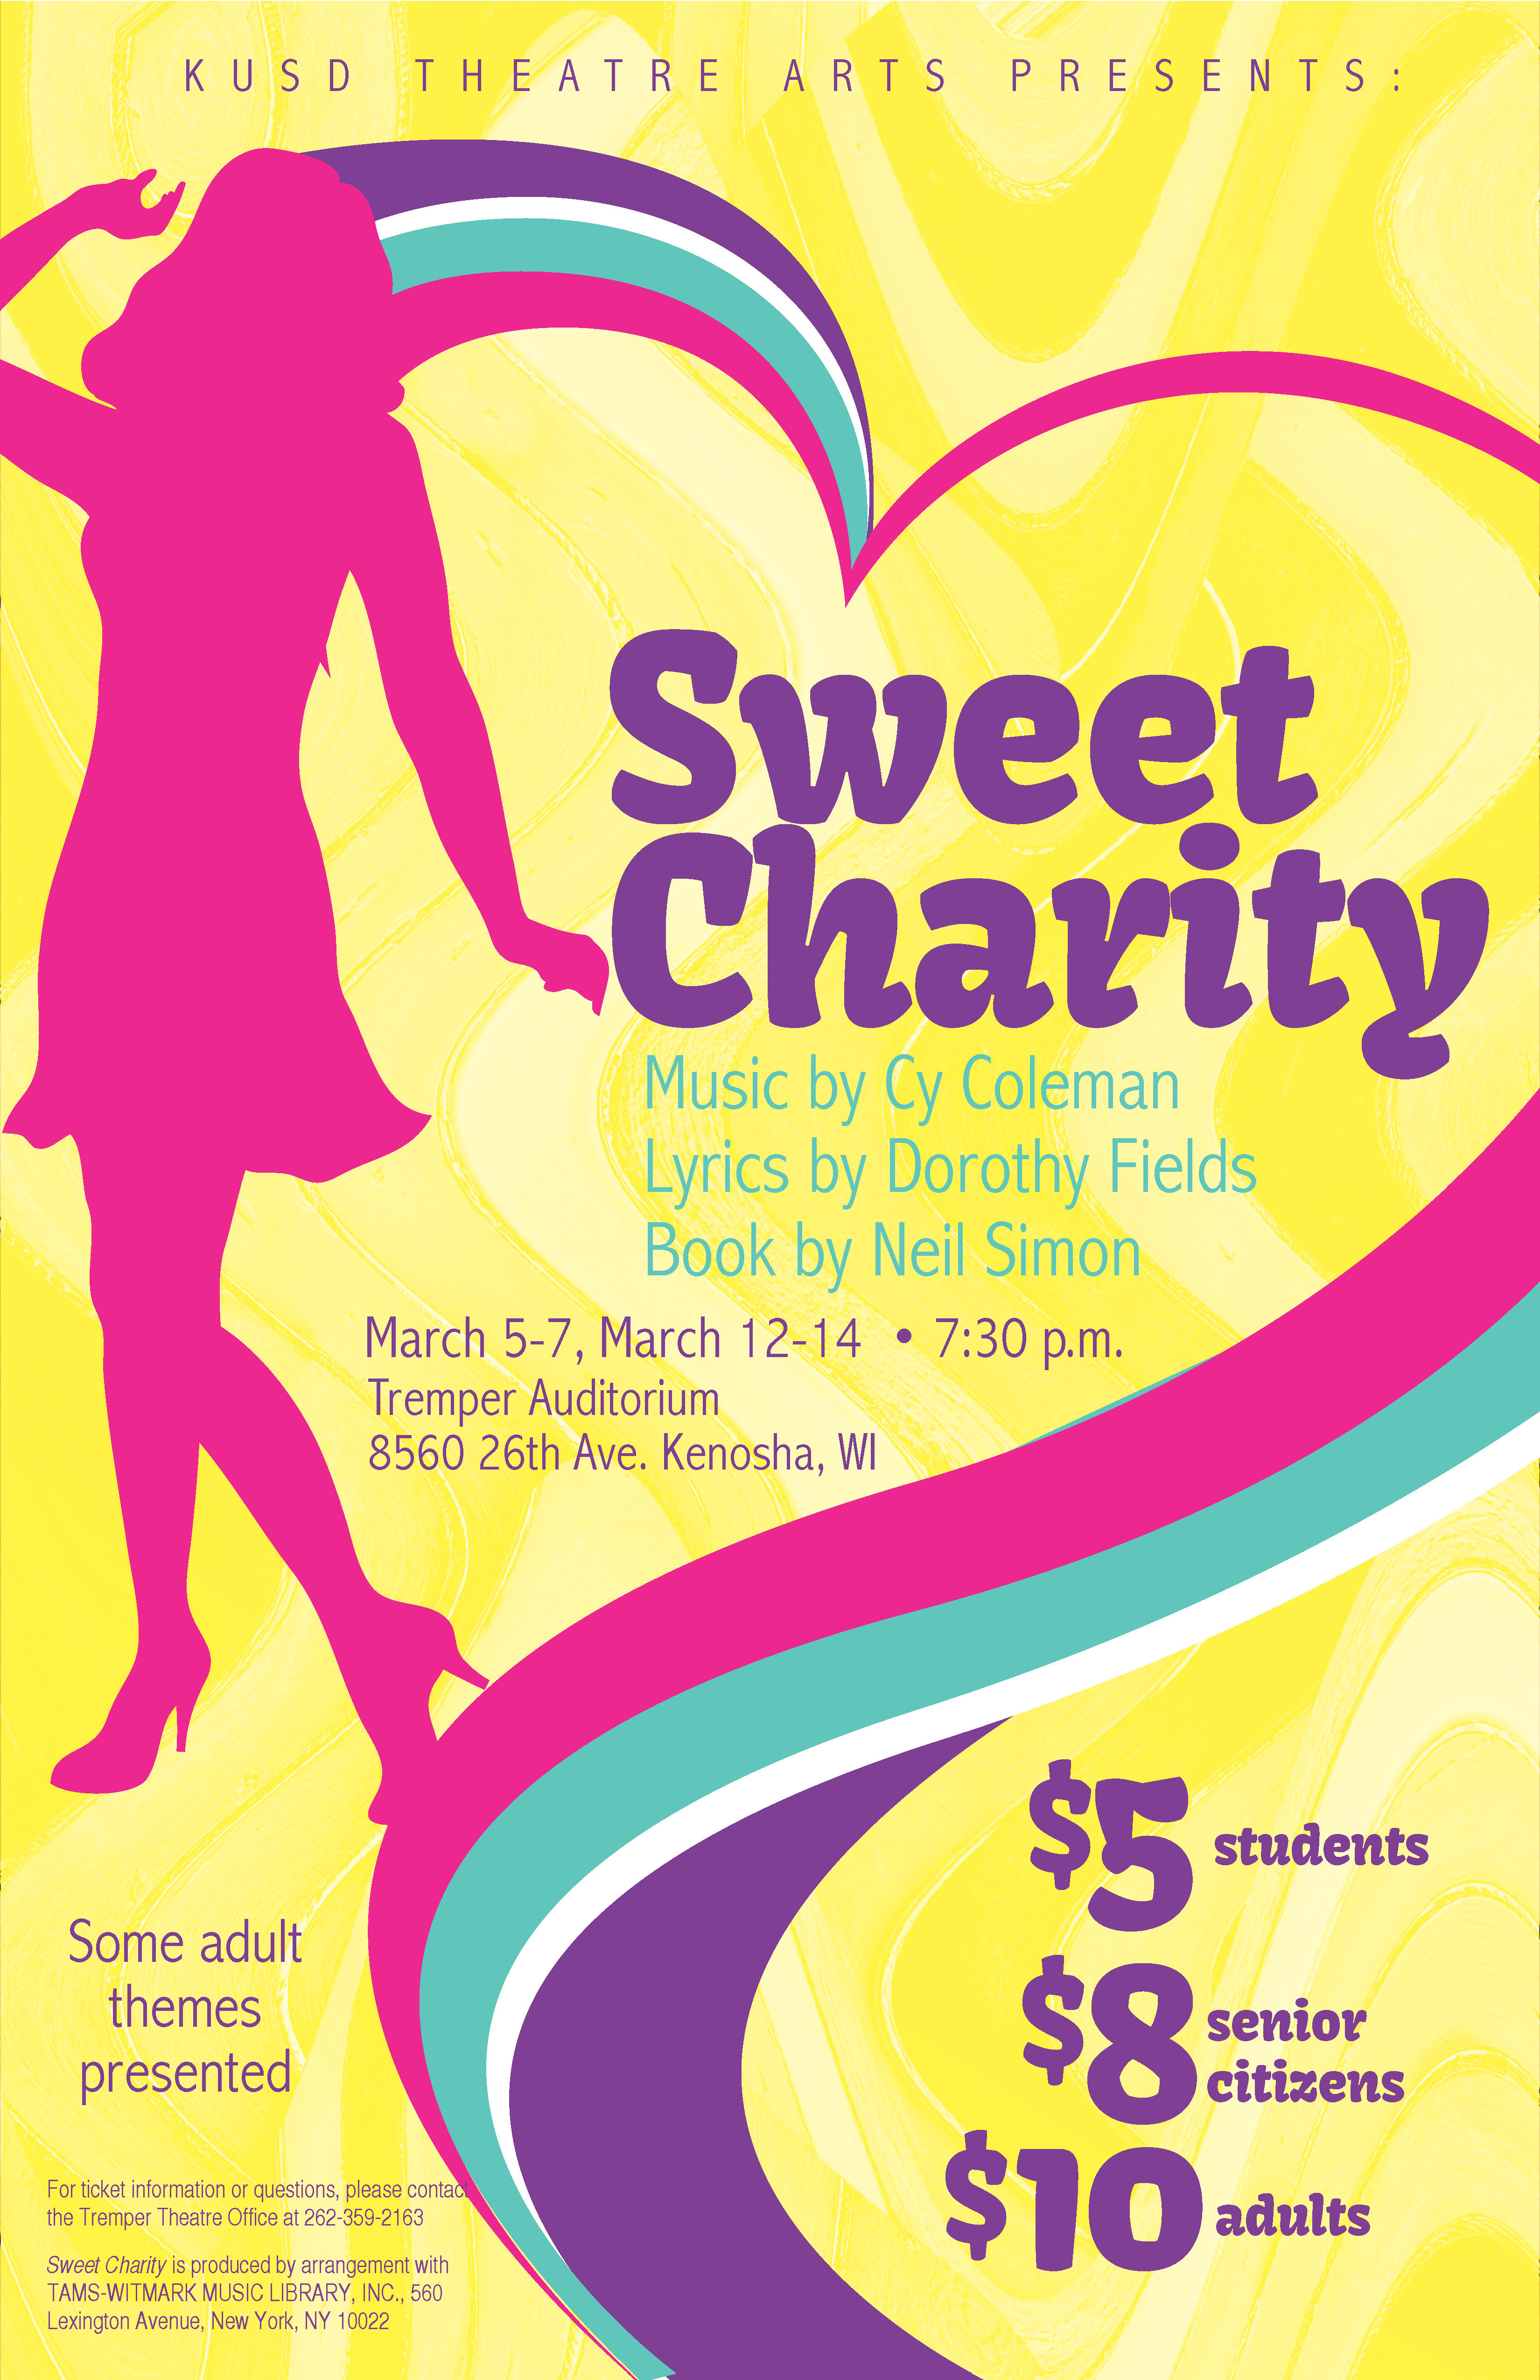 The poster for Sweet Charity